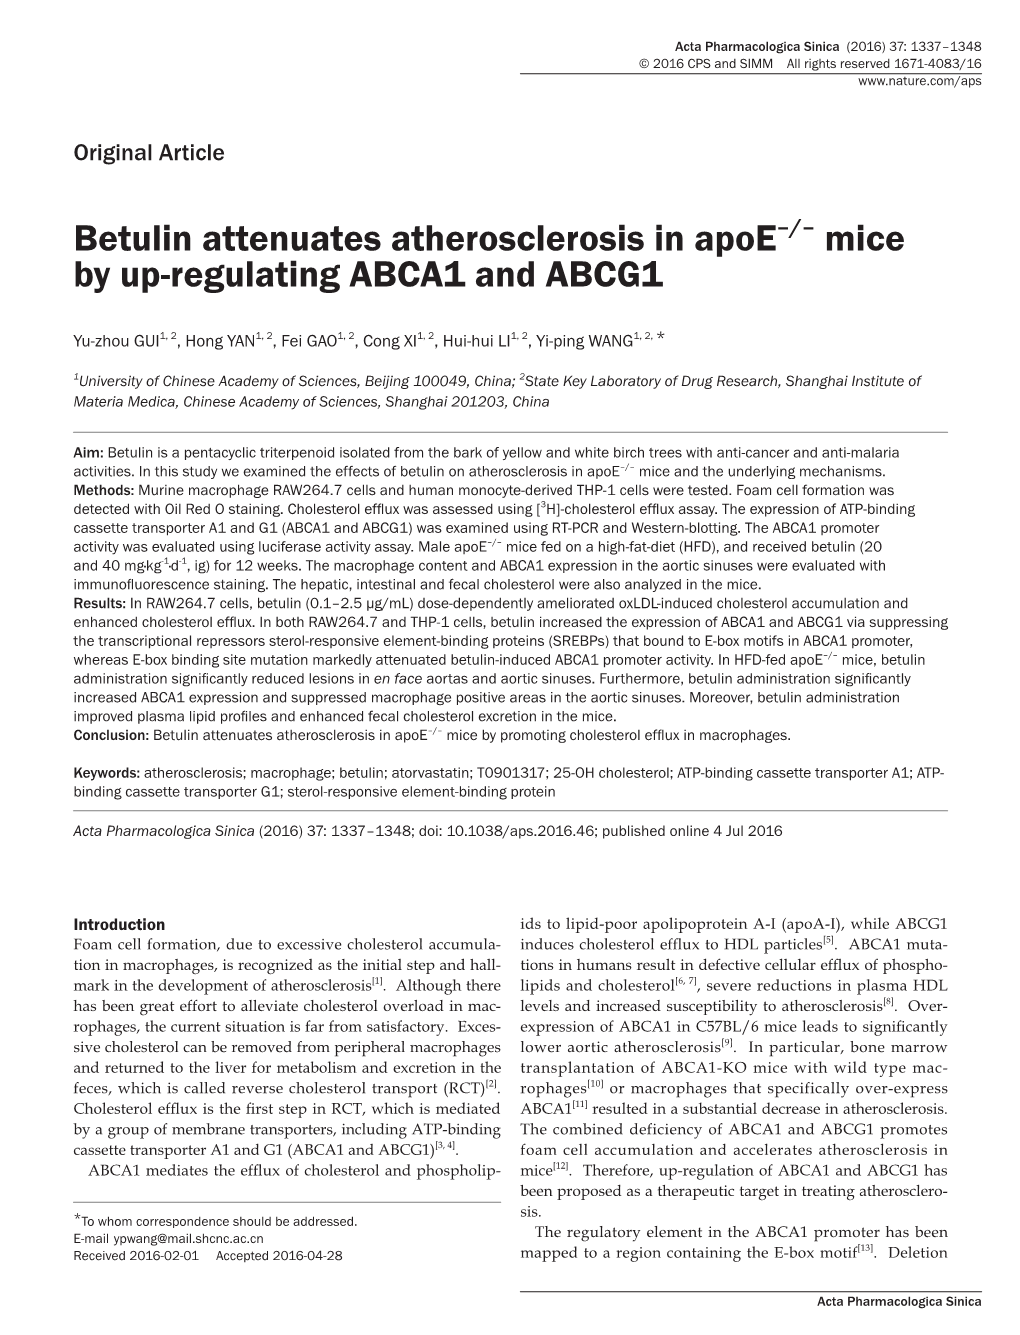 Betulin Attenuates Atherosclerosis in Apoe-/- Mice by Up-Regulating